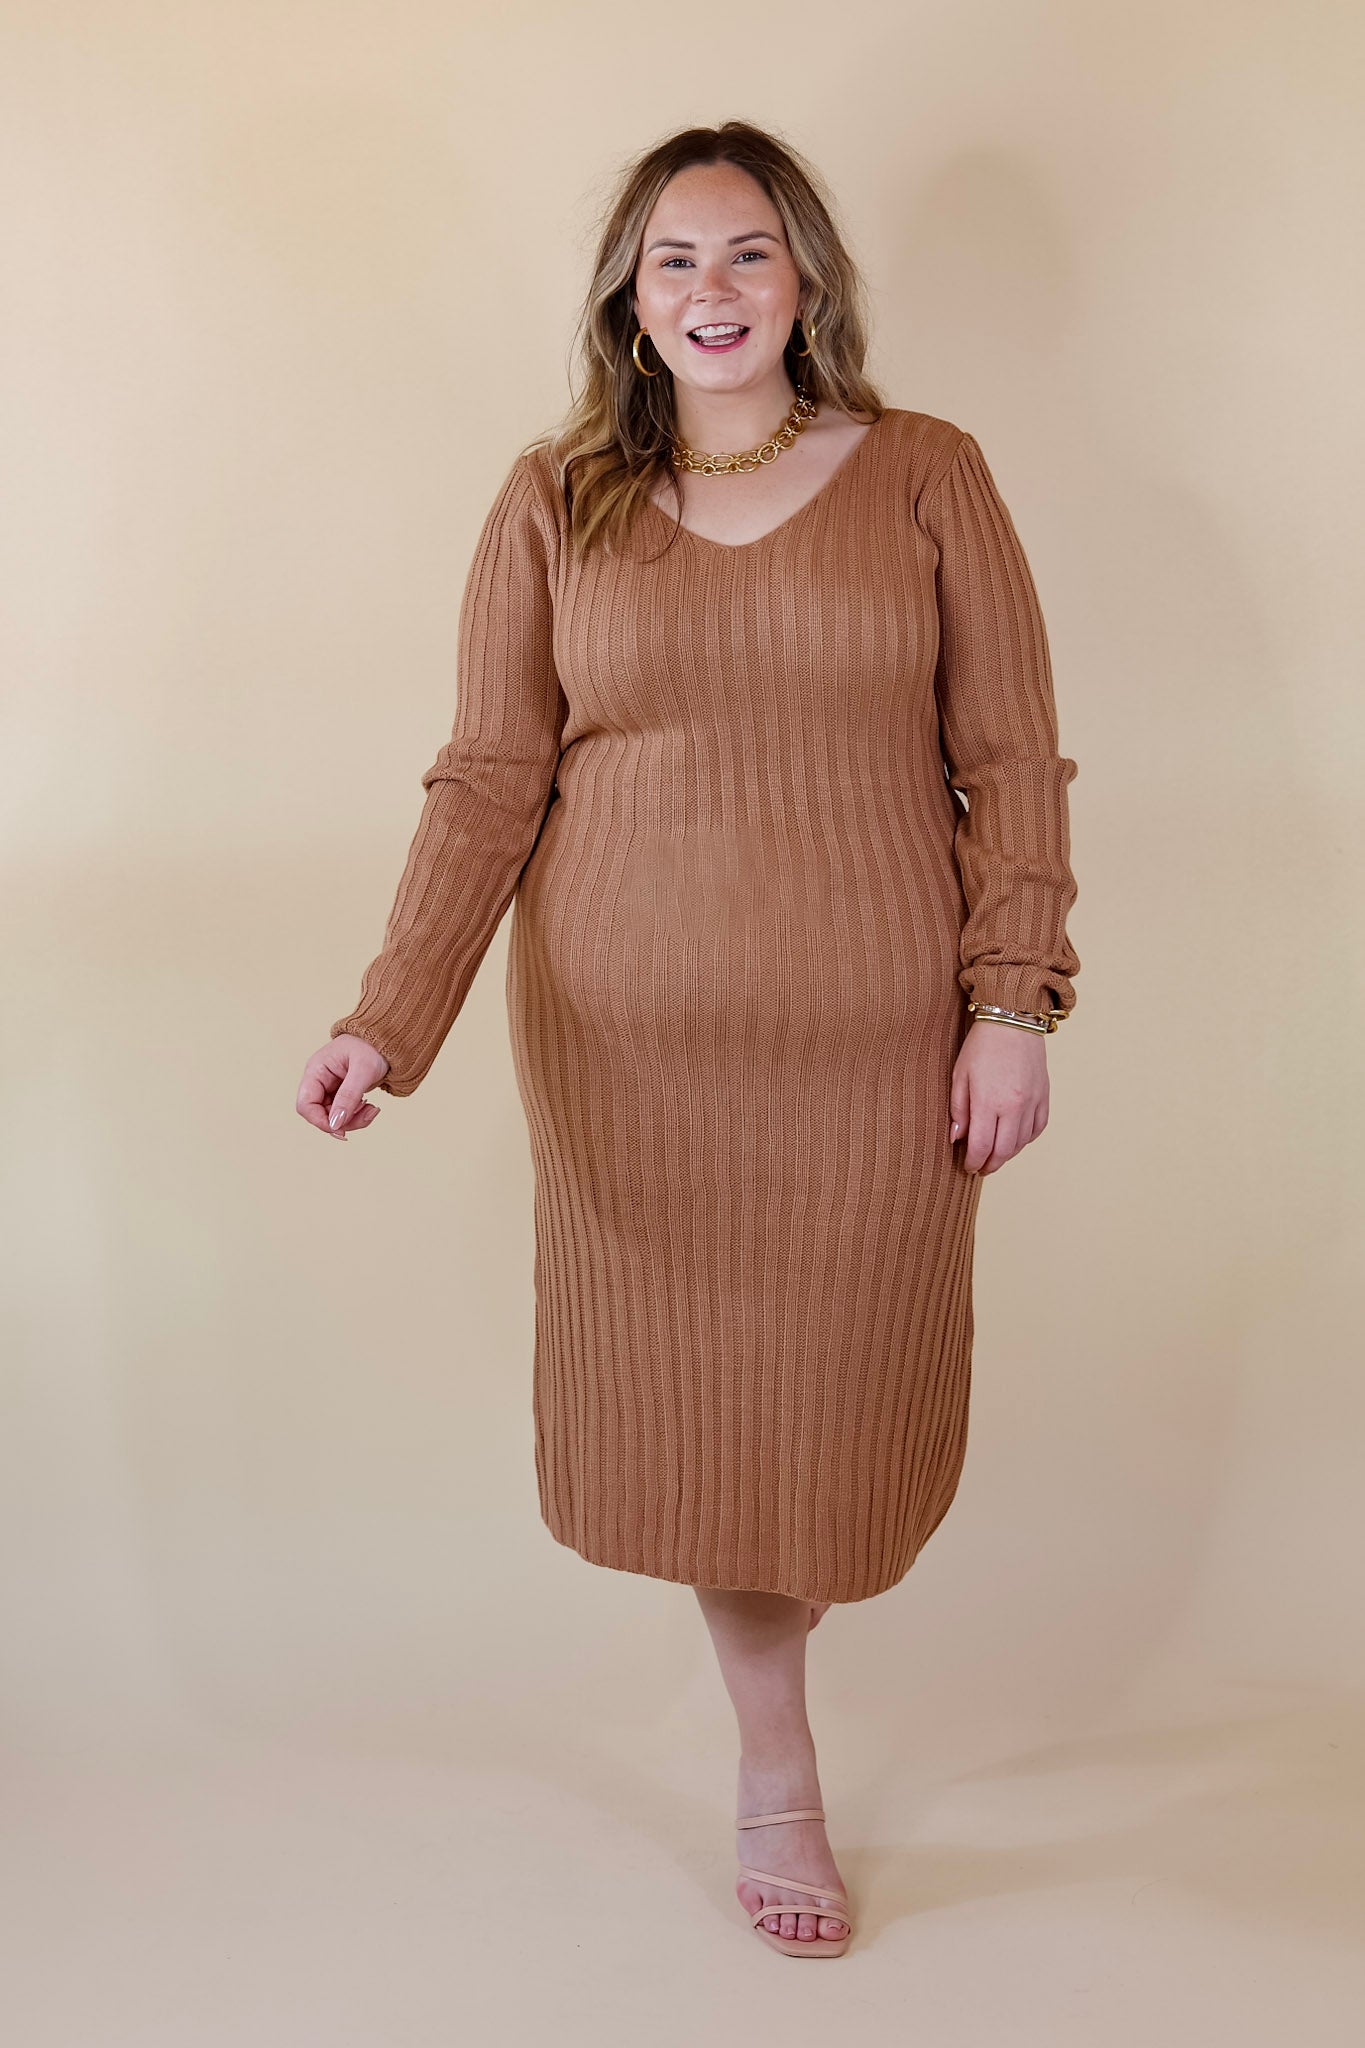 Pumpkin Spice Weather V Neck Midi Sweater Dress in Clay Nude - Giddy Up Glamour Boutique